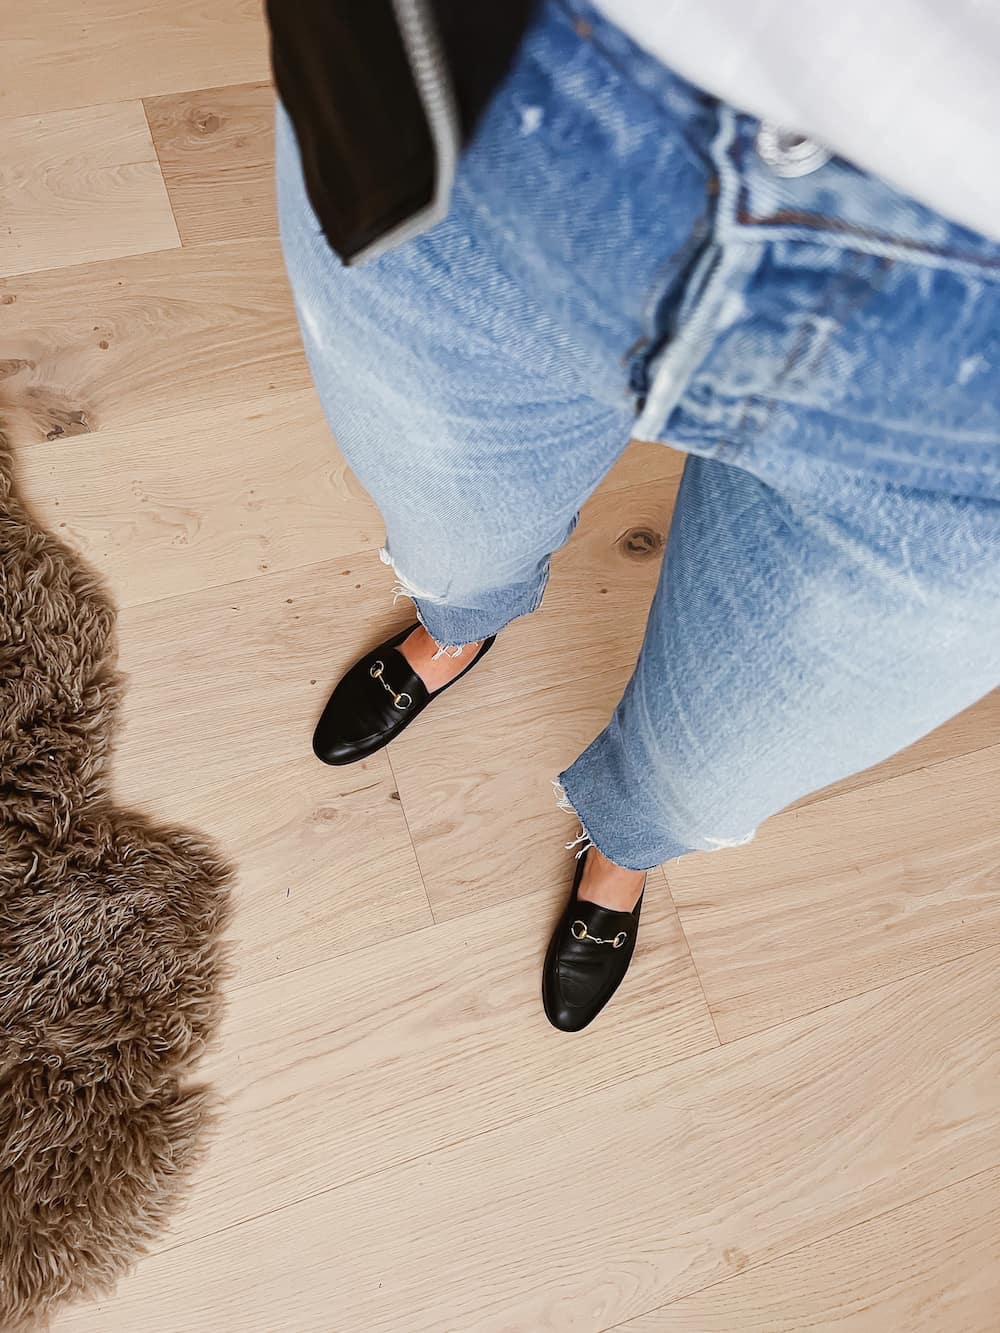 image of a woman's legs wearing blue jeans and black loafers